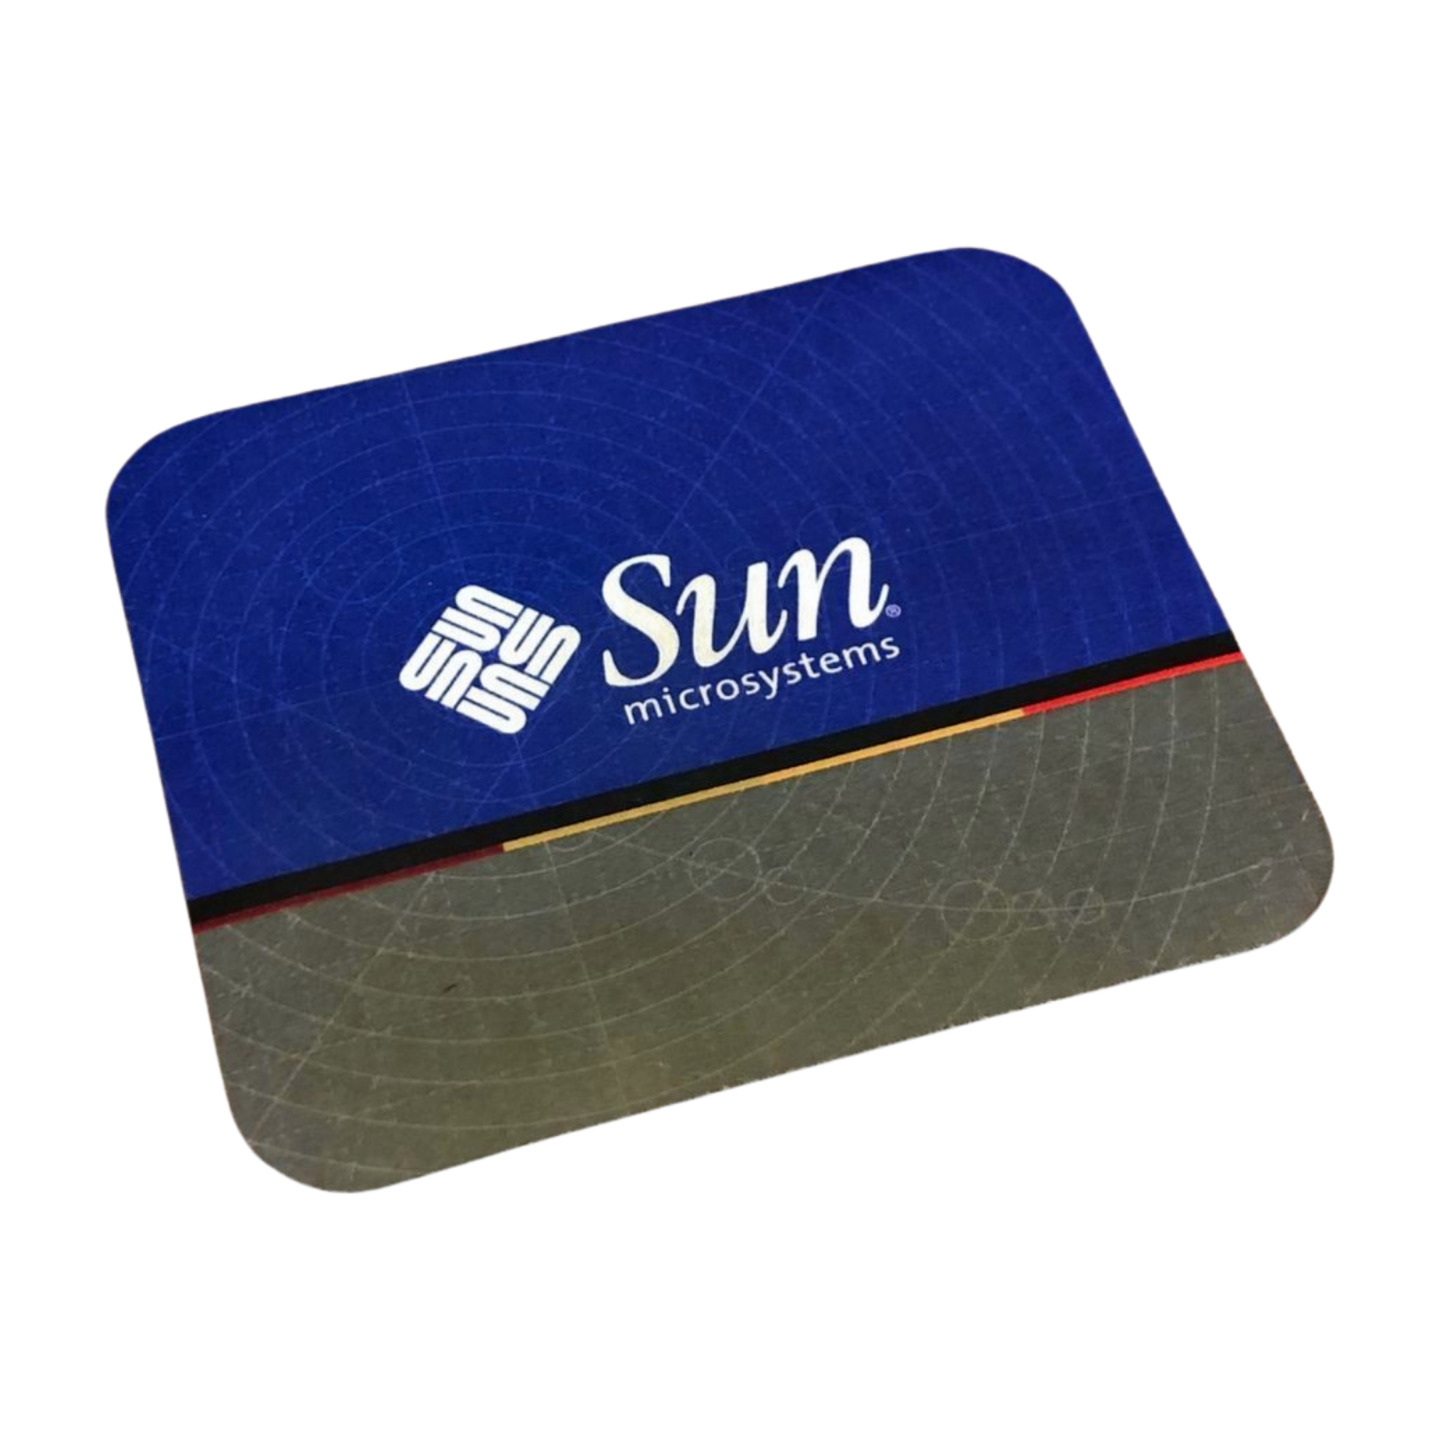 Vintage Sun Microsystems Mouse Pad